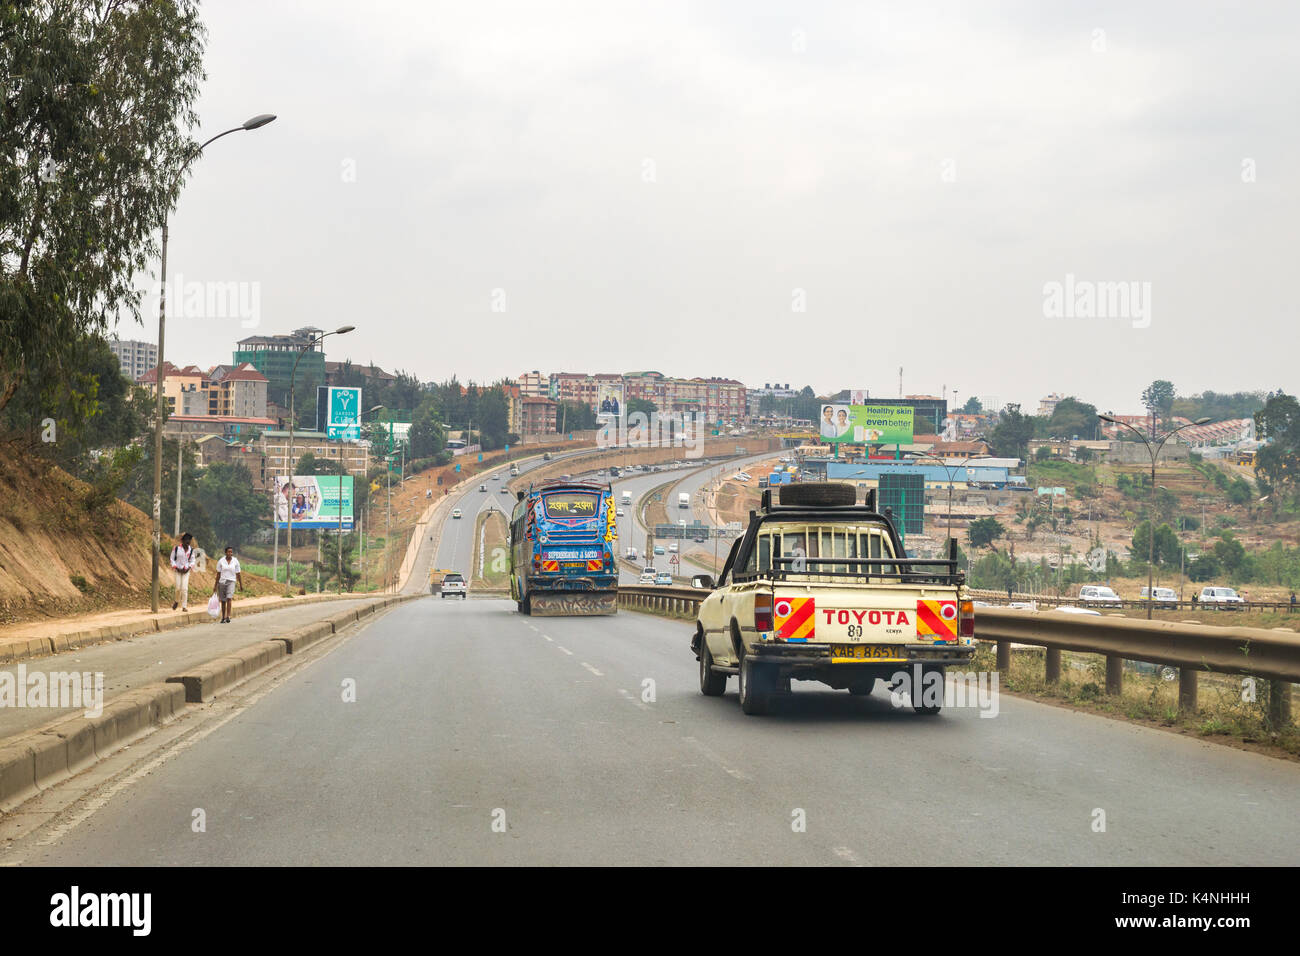 Vehicles driving on slip road to Thika Highway with traffic on main highway as pedestrians walk on side of road, Nairobi, Kenya Stock Photo